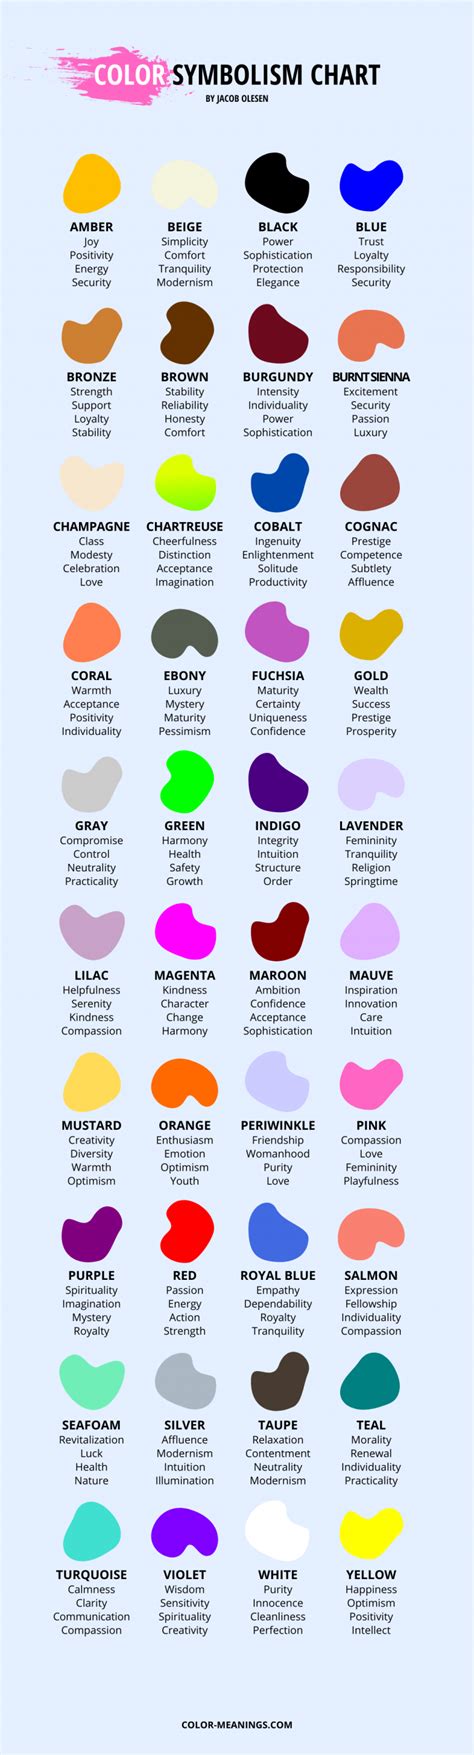 Color Symbolism Chart Media Mrs Hastie S Class Website Maybe You